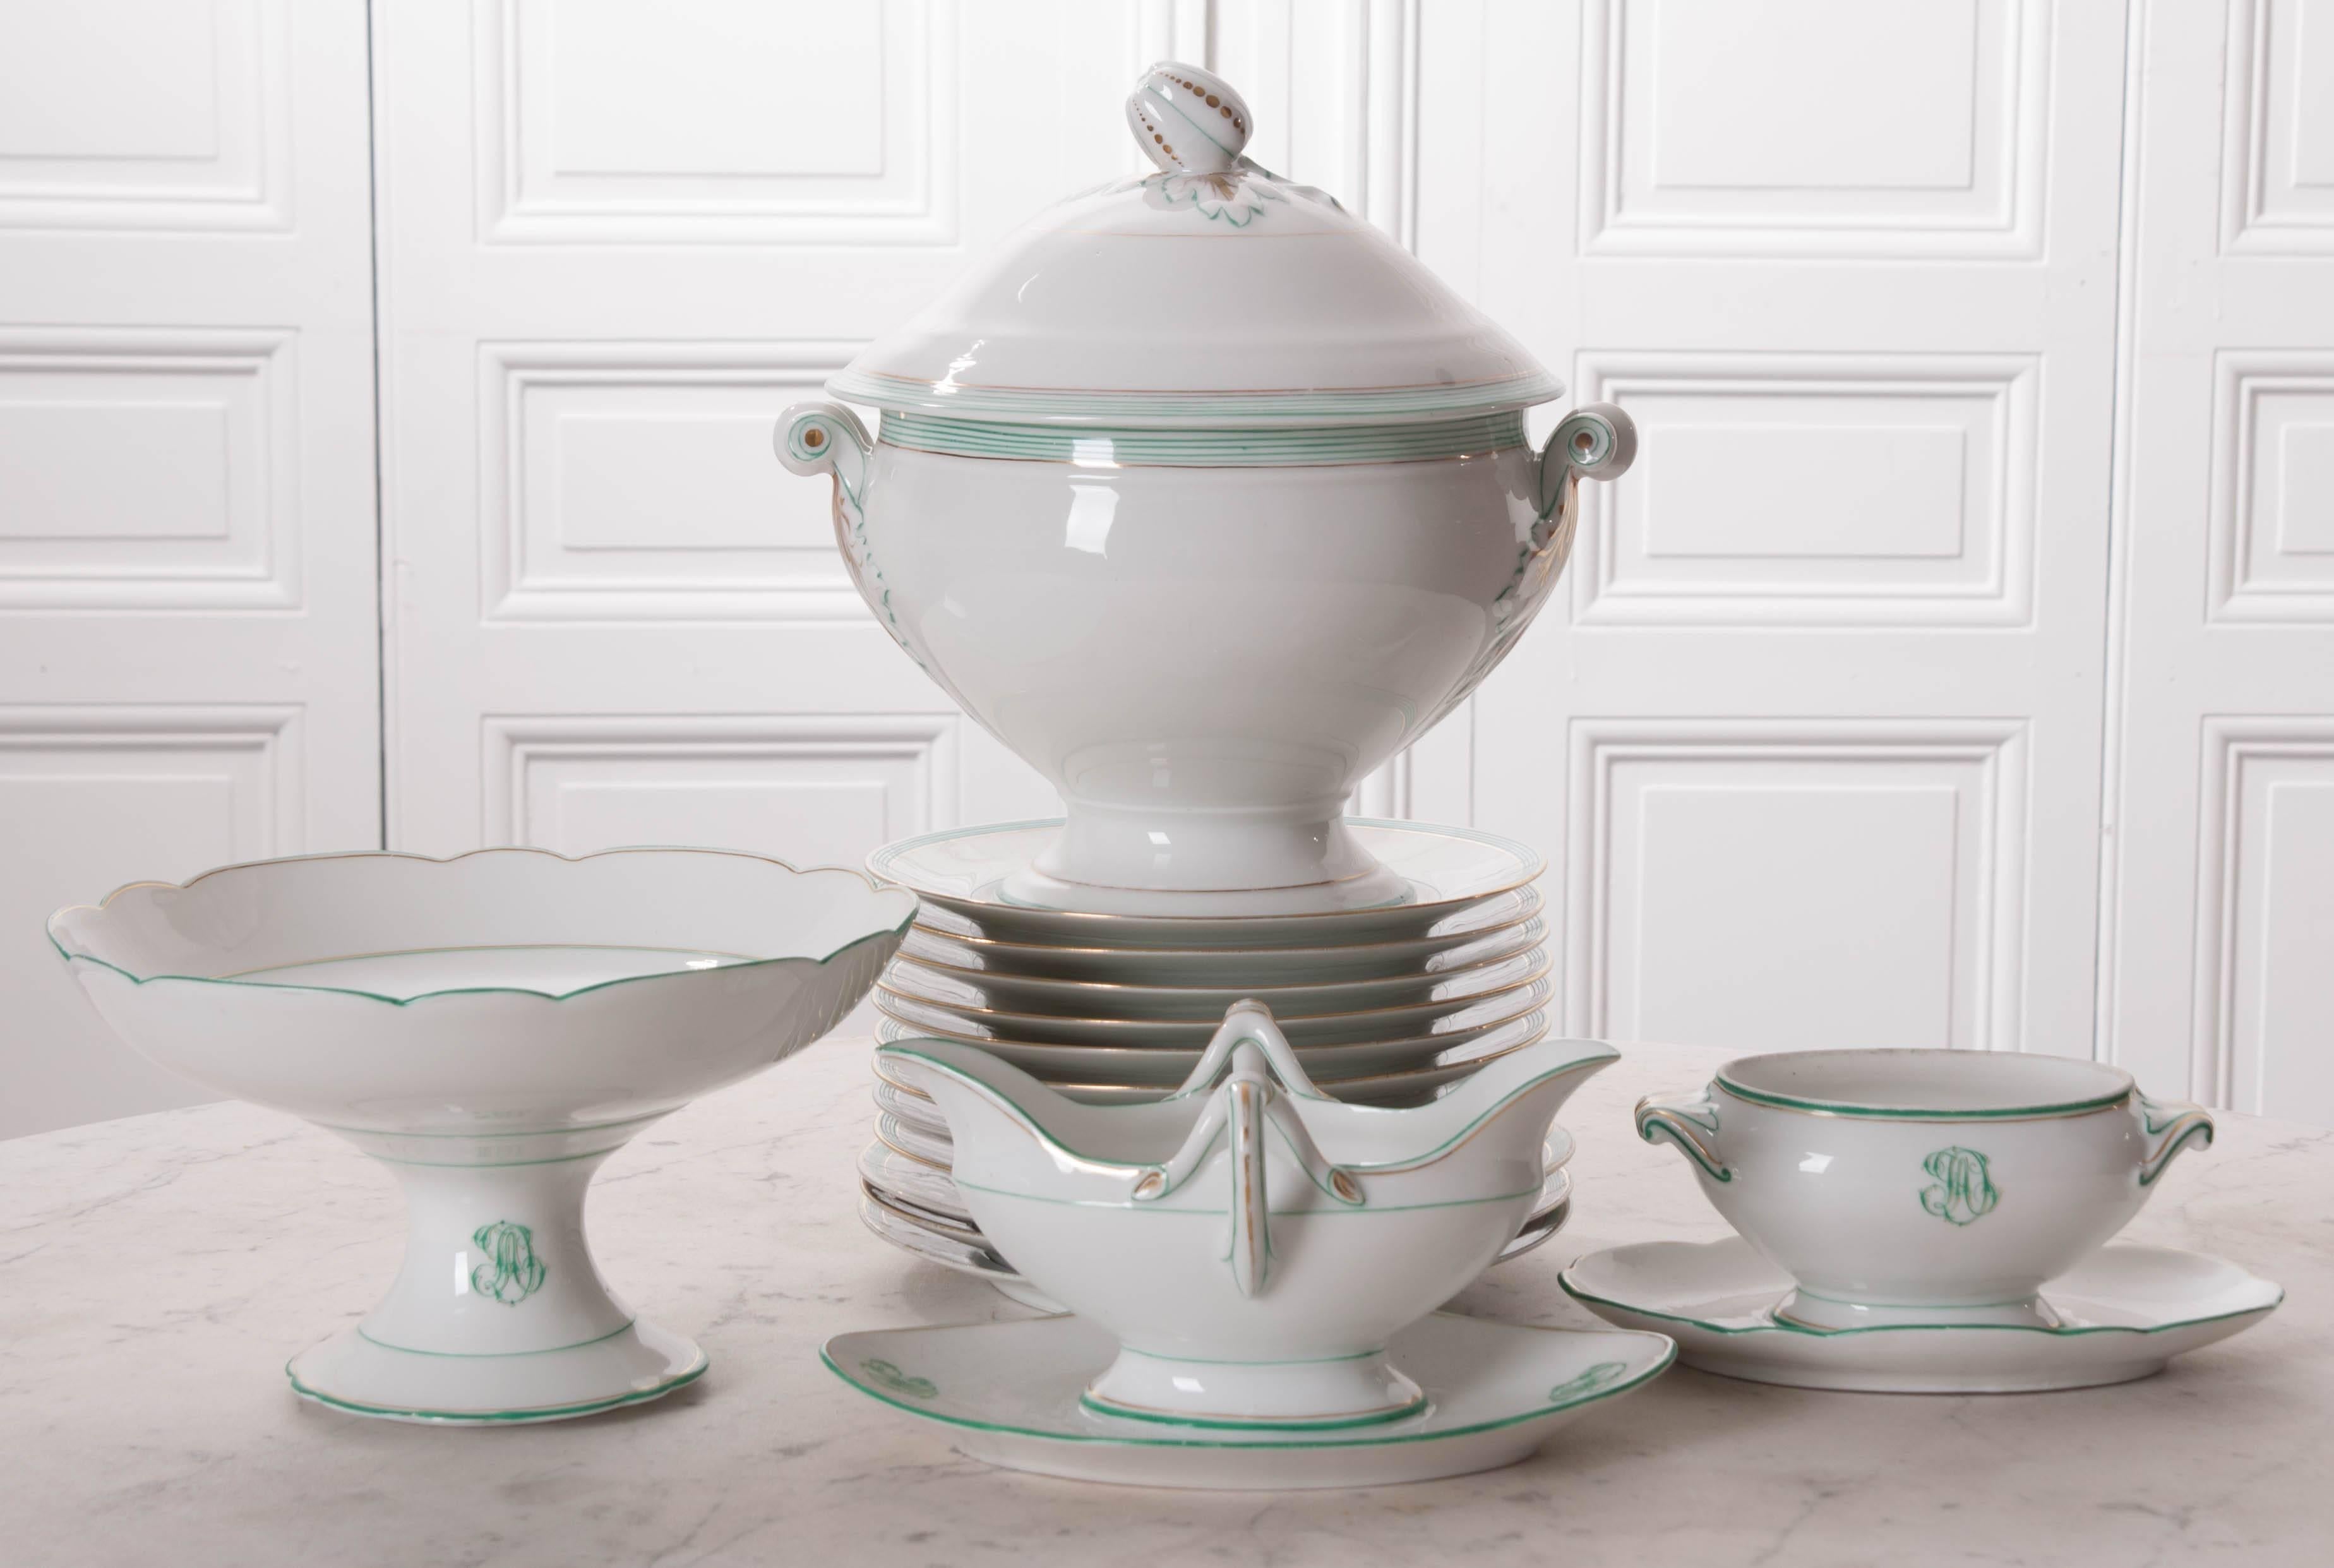 A beautiful set of old Pairs porcelain dinner pieces from mid-19th century France. The service pieces are monogrammed and trimmed in a lovely blue-green and gold. The soup tureen has styled handles with foliate details and a lid with a pumpkin